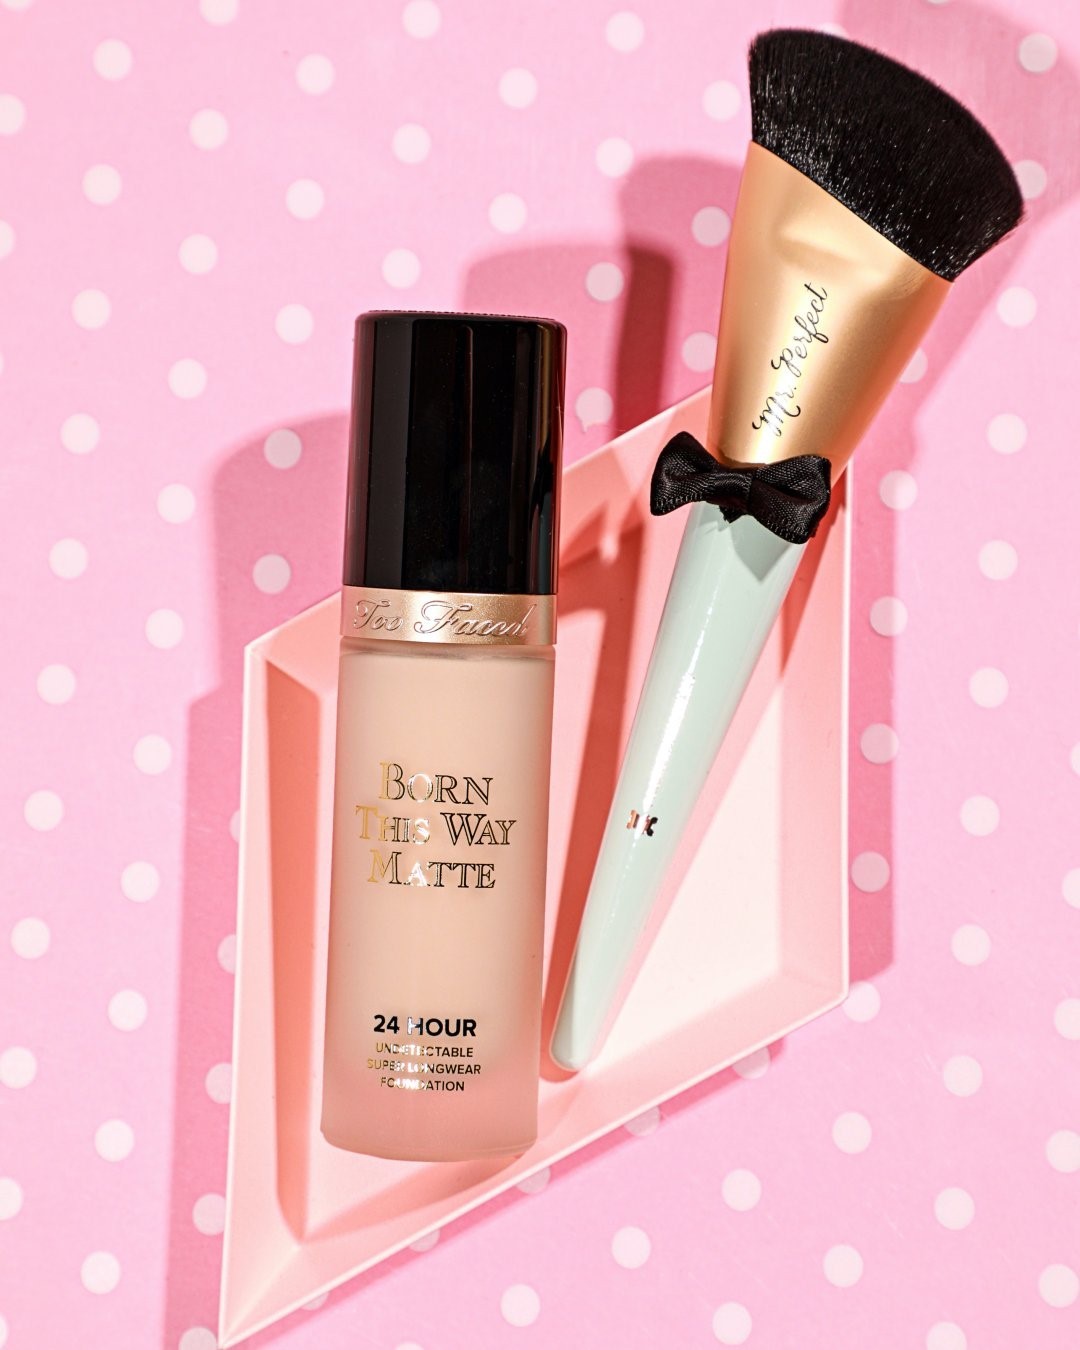 Too Faced Cosmetics - Leave a 😍 if you've fallen in love with our Born This Way Matte Foundation! "I like how Born This Way Matte Foundation gives a smooth finish without having to do much work when y...